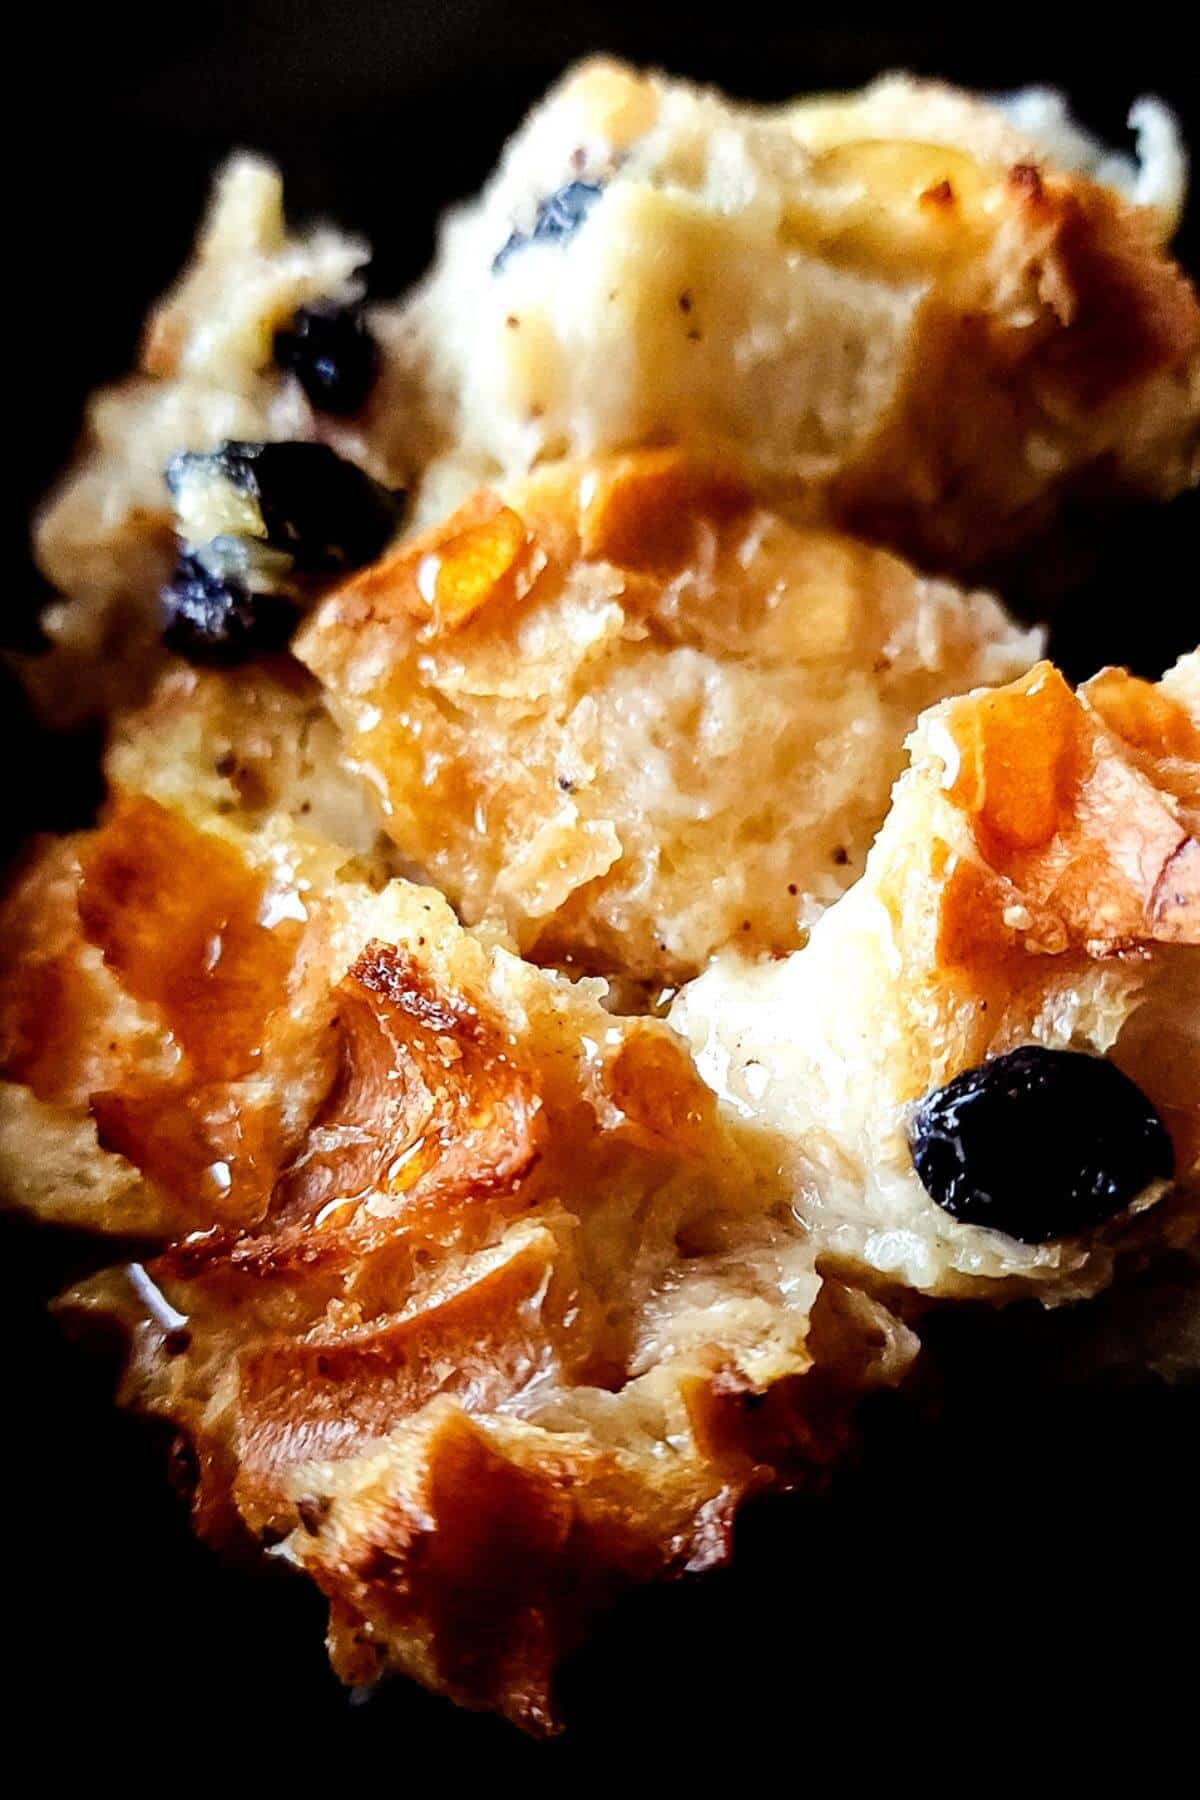 A piece of bread pudding with black raisins.